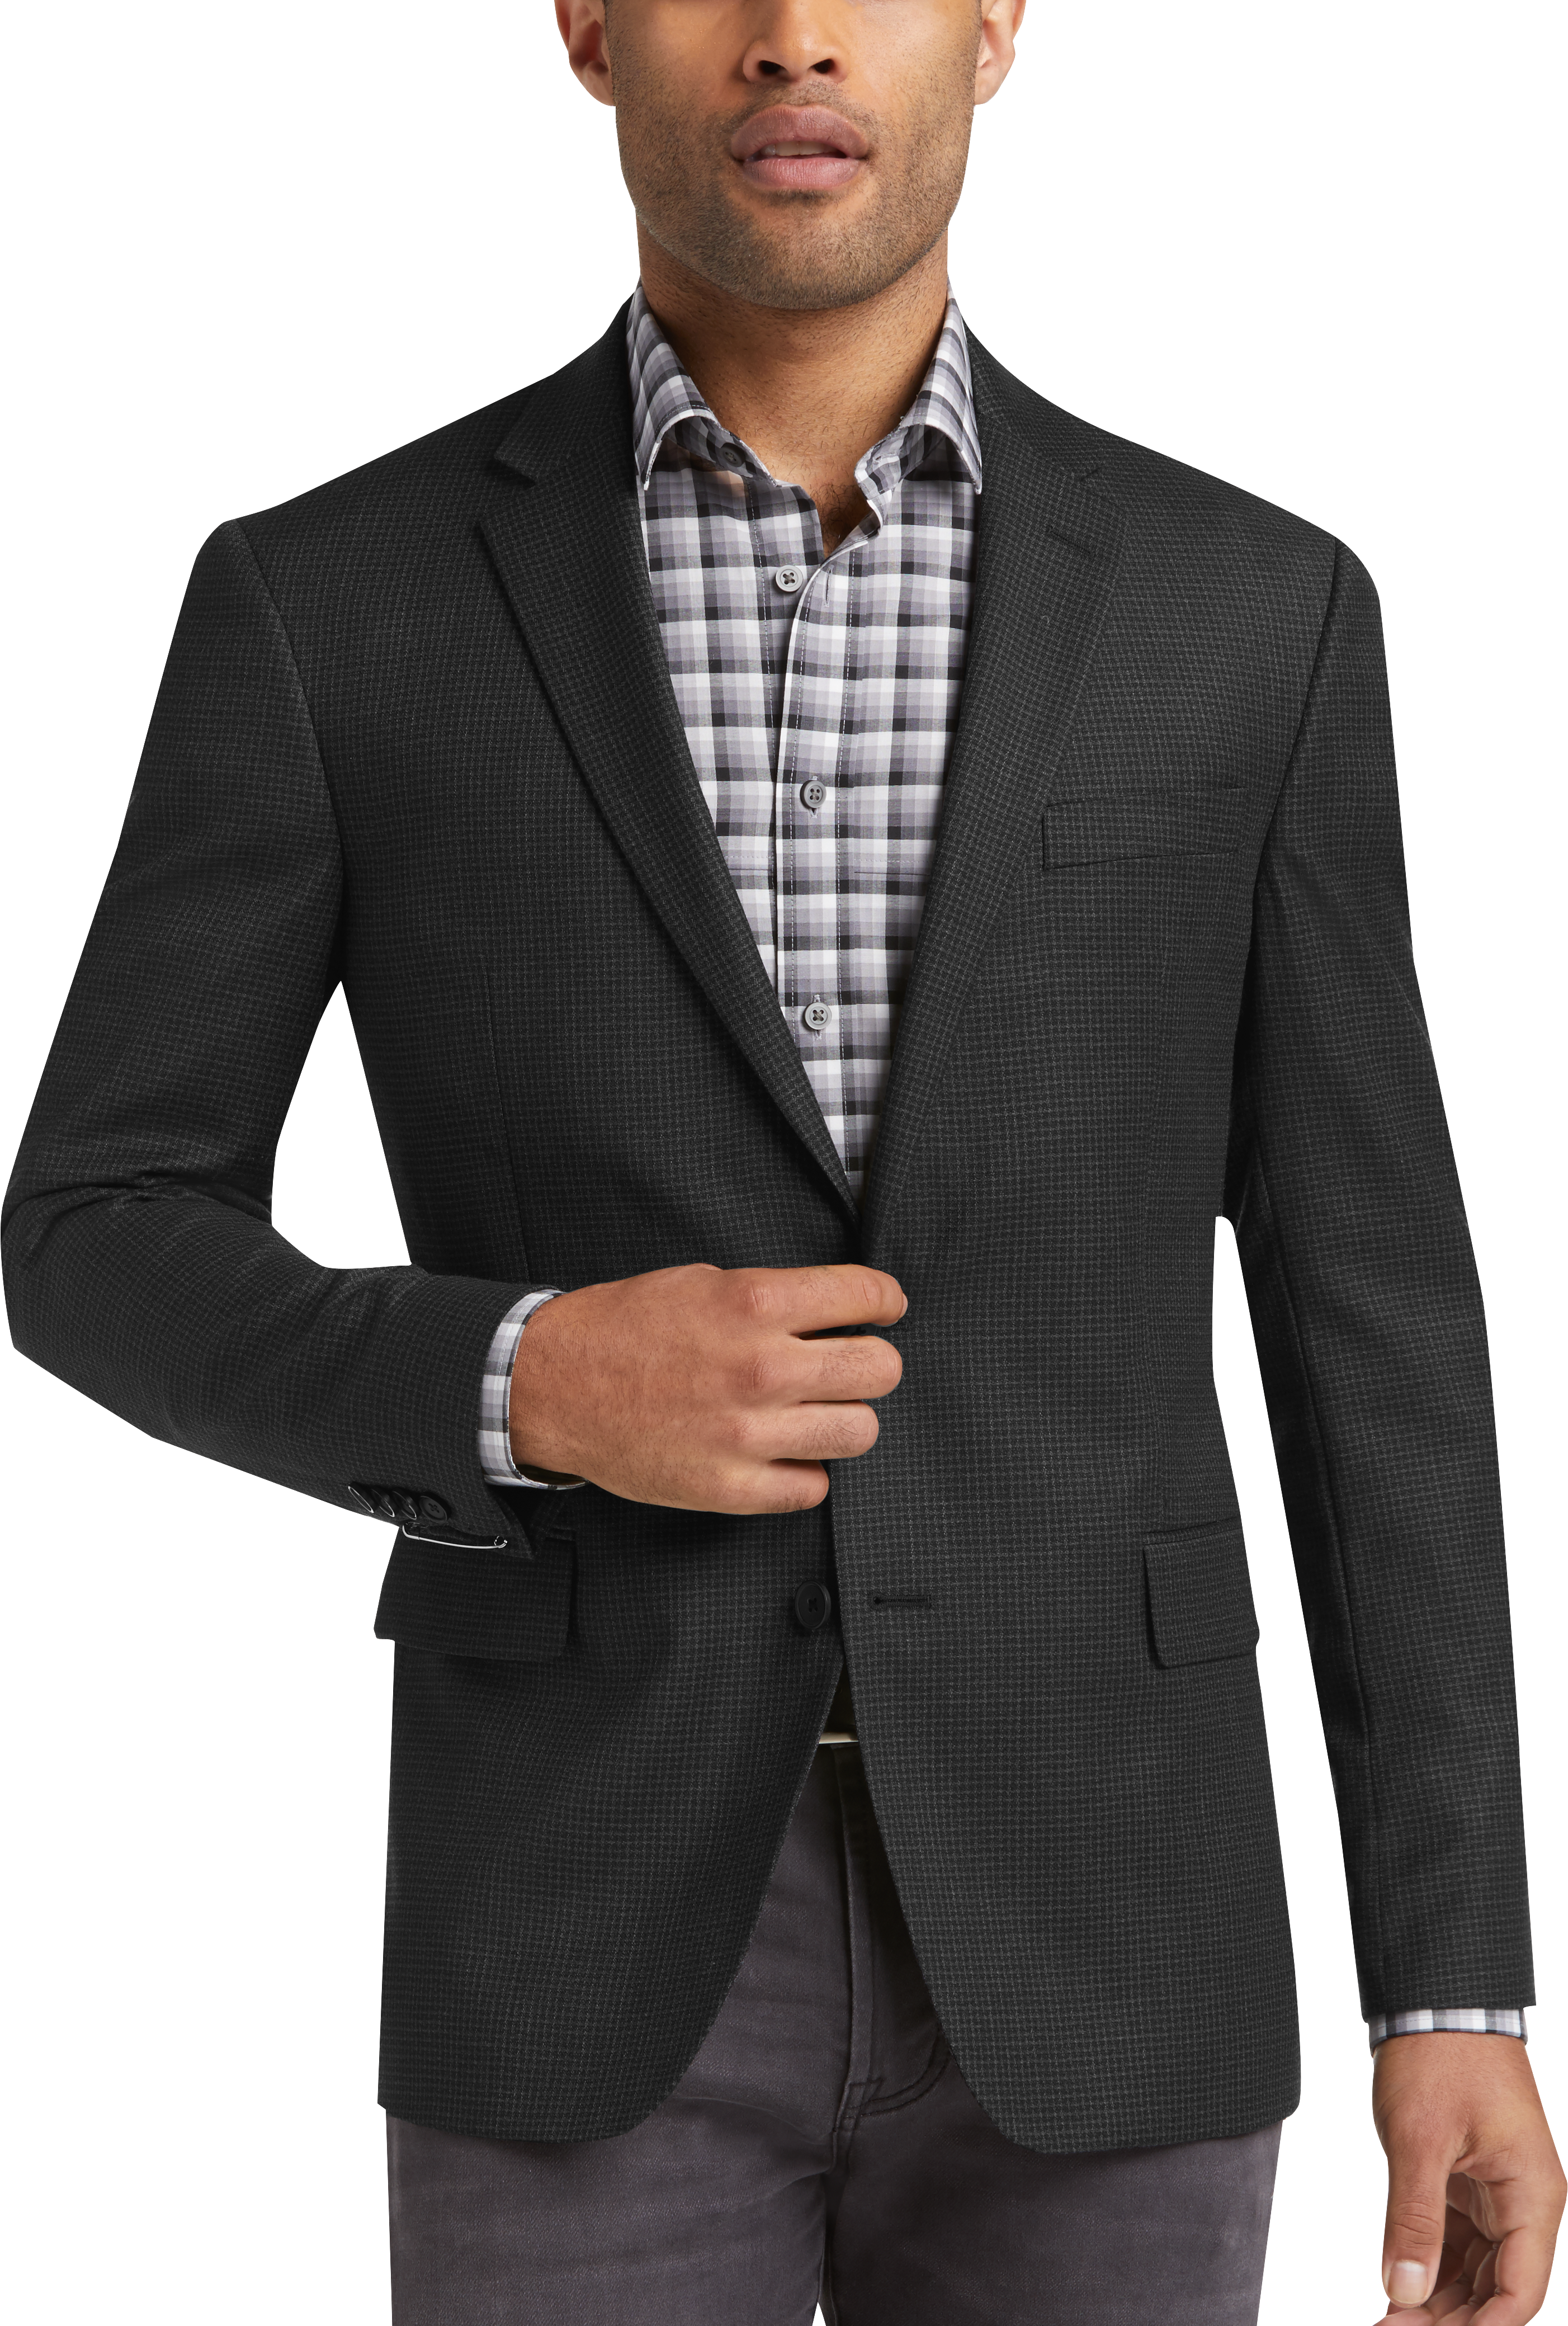 Awearness Kenneth Cole Charcoal Check Slim Fit Sport Coat - Men's Sport ...